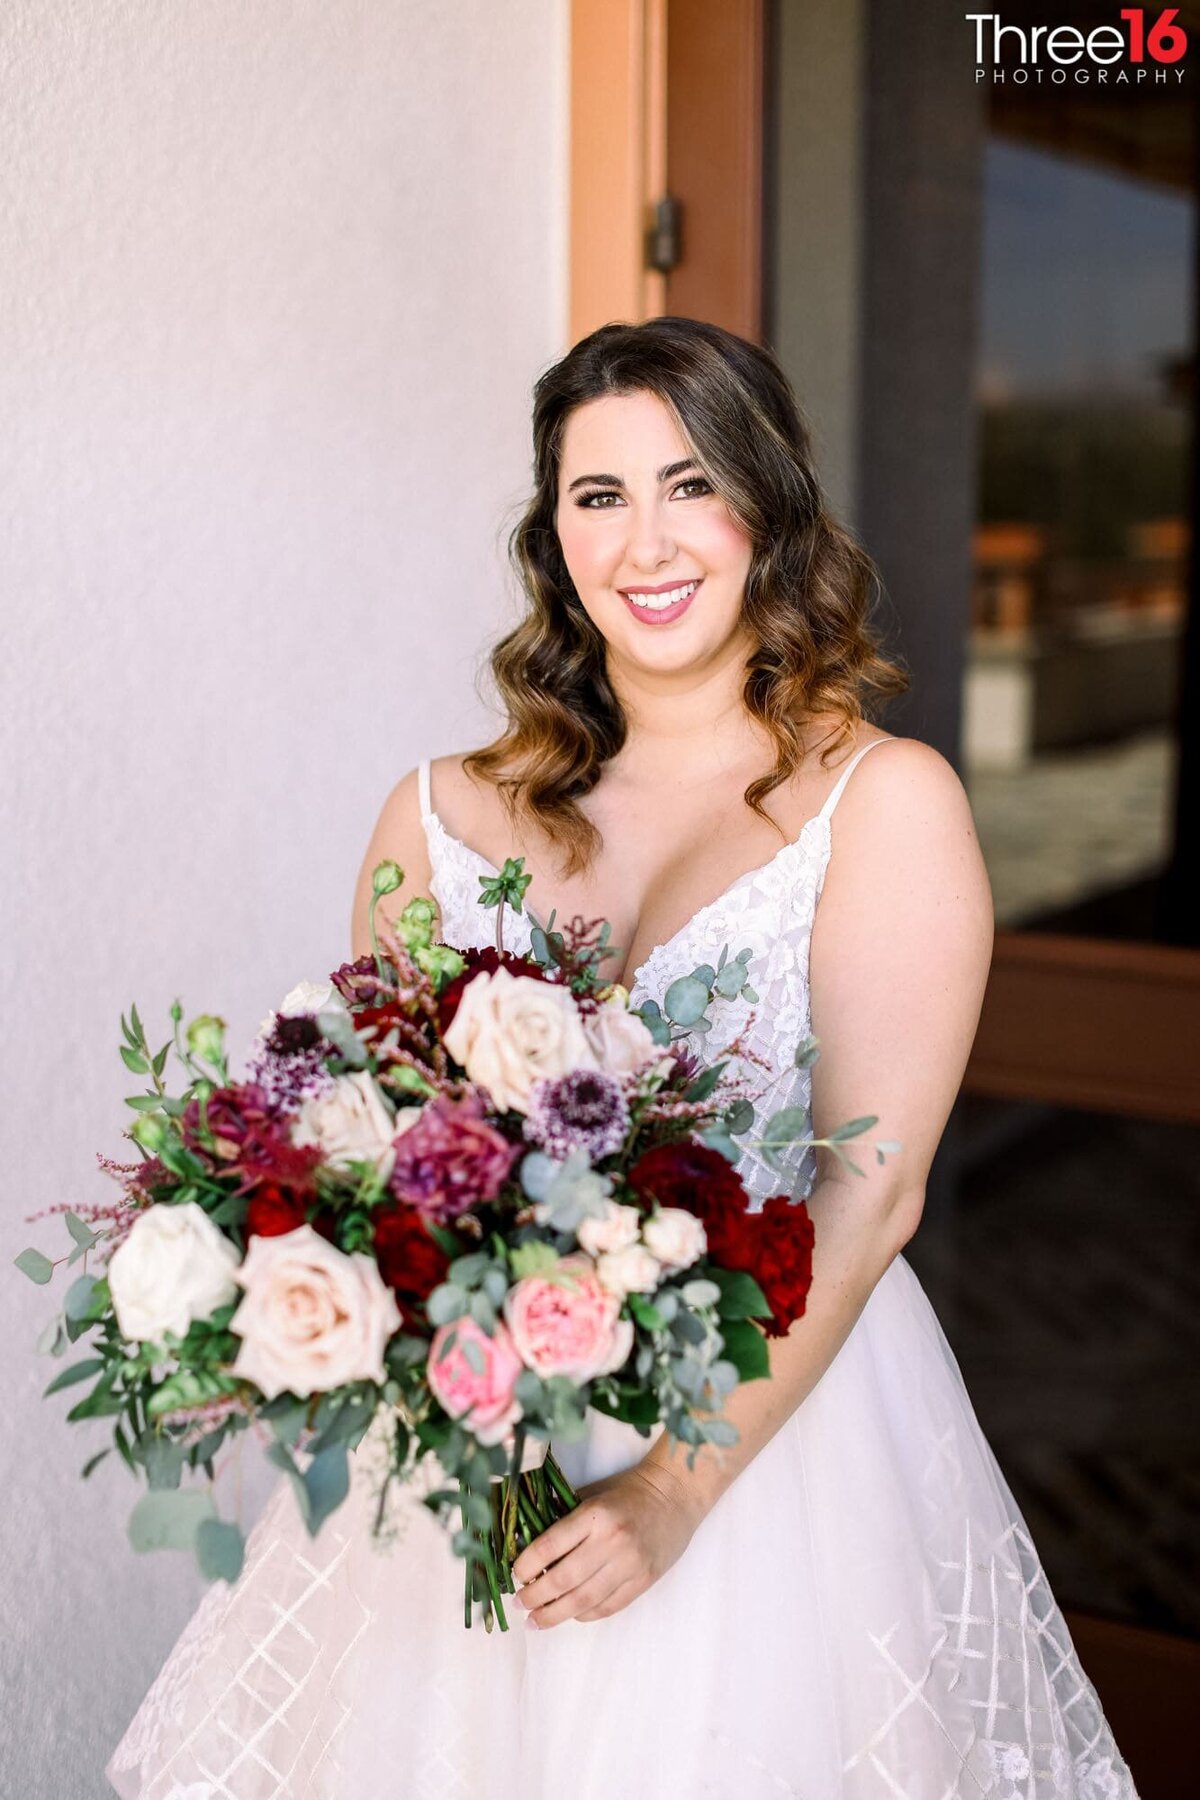 Bride poses with her beautiful bouquet prior to the wedding ceremony